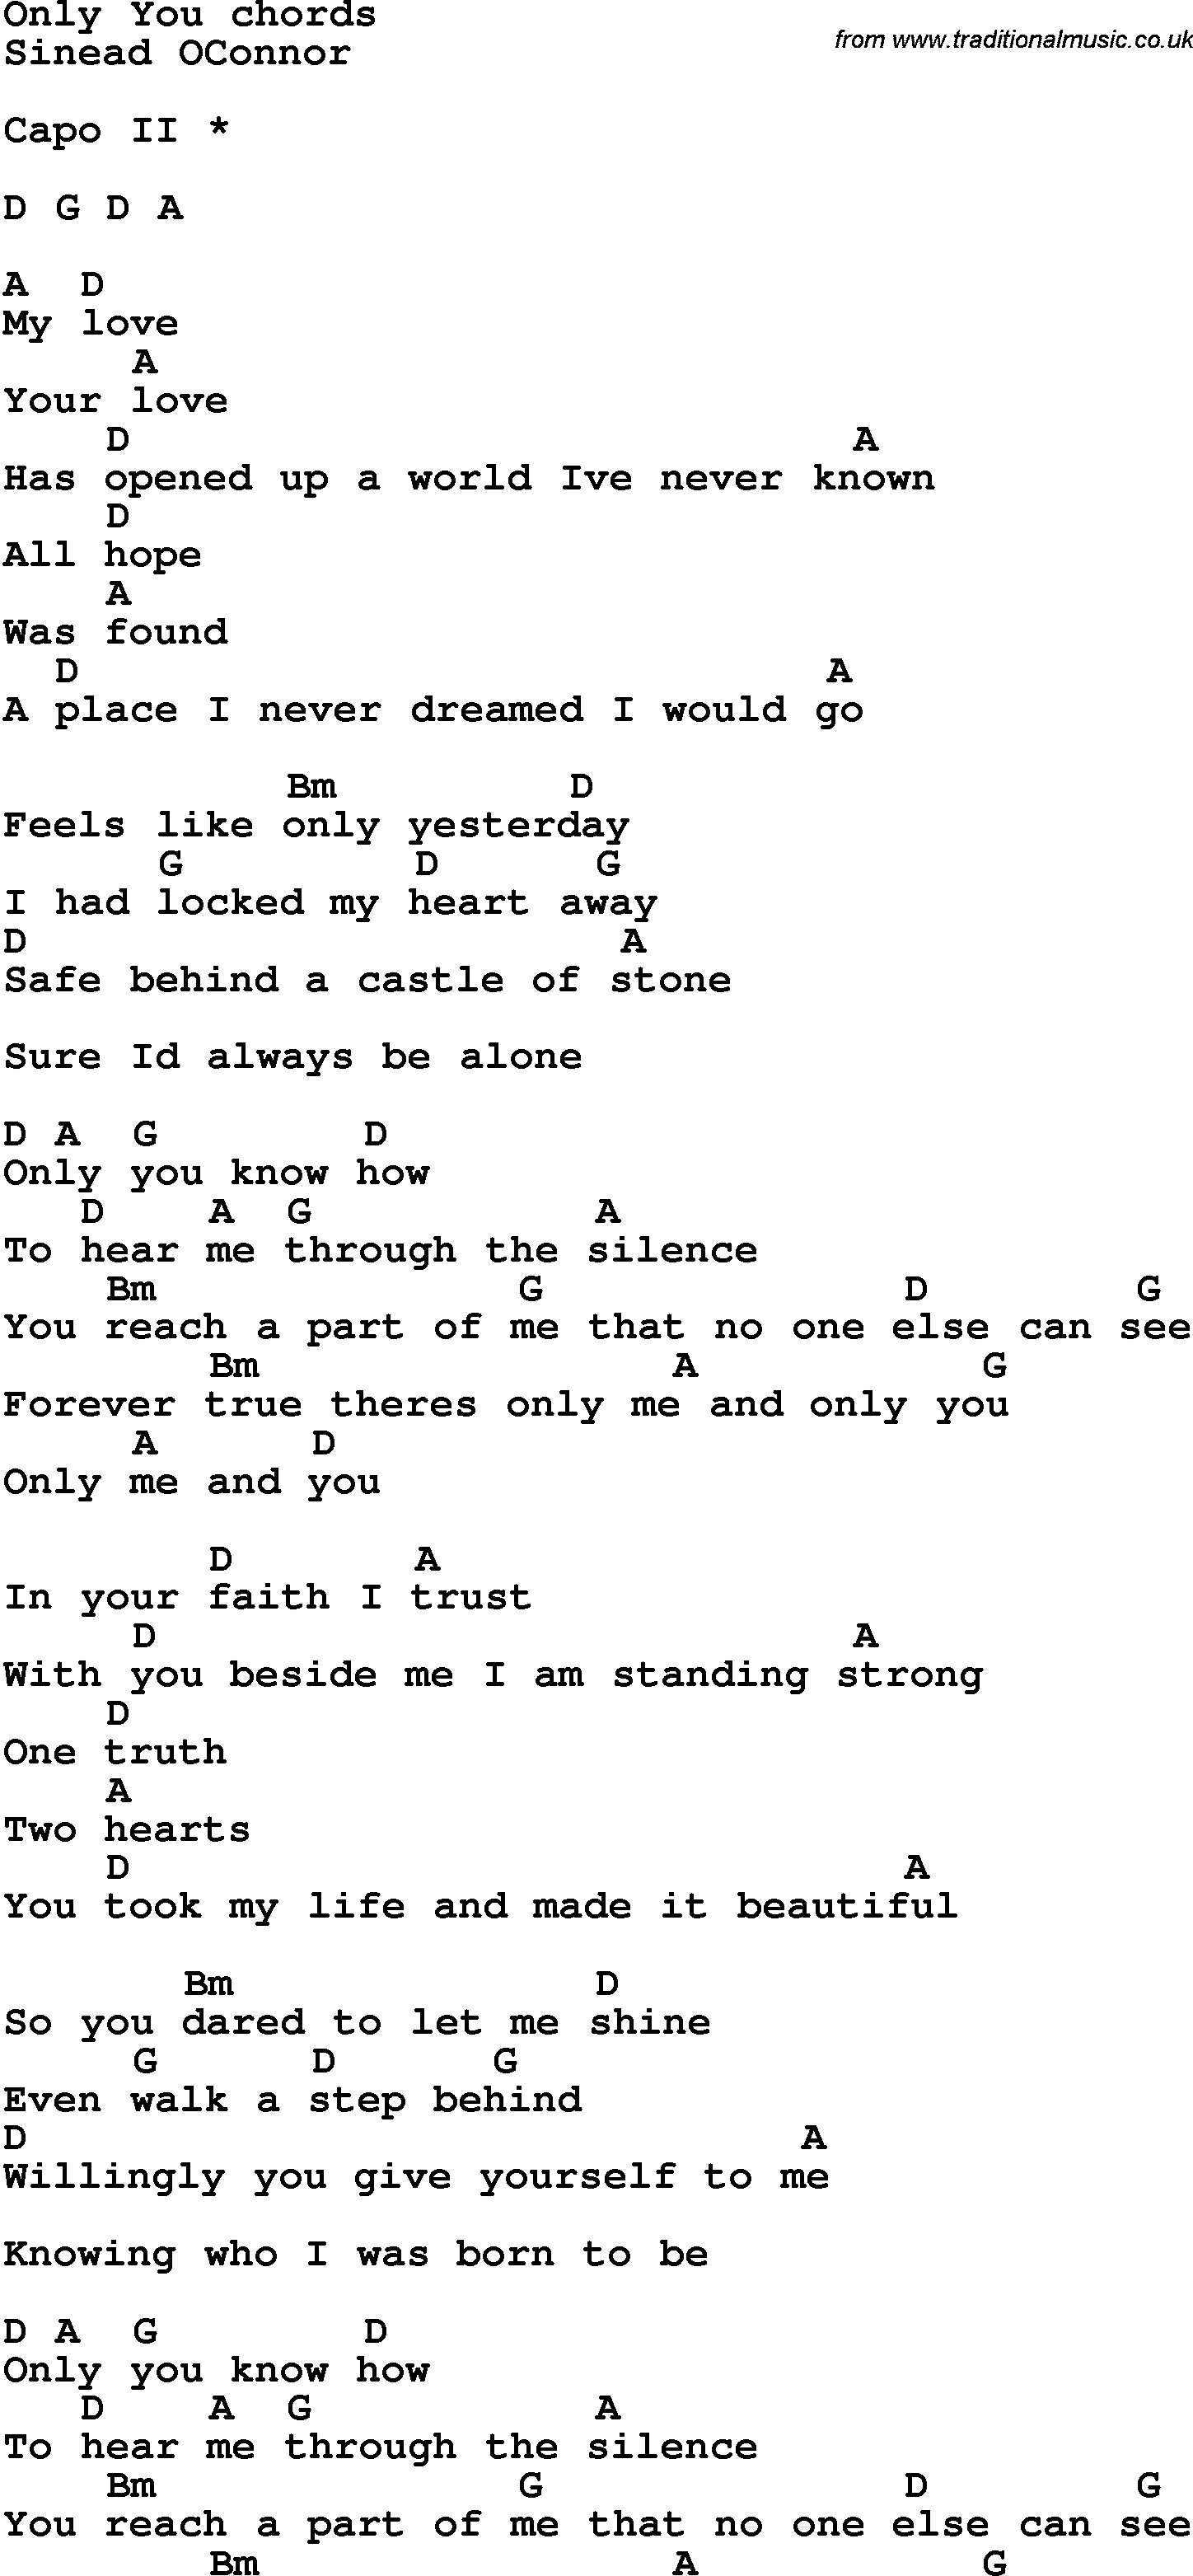 Song Lyrics with guitar chords for Only You - Sinead O’connor